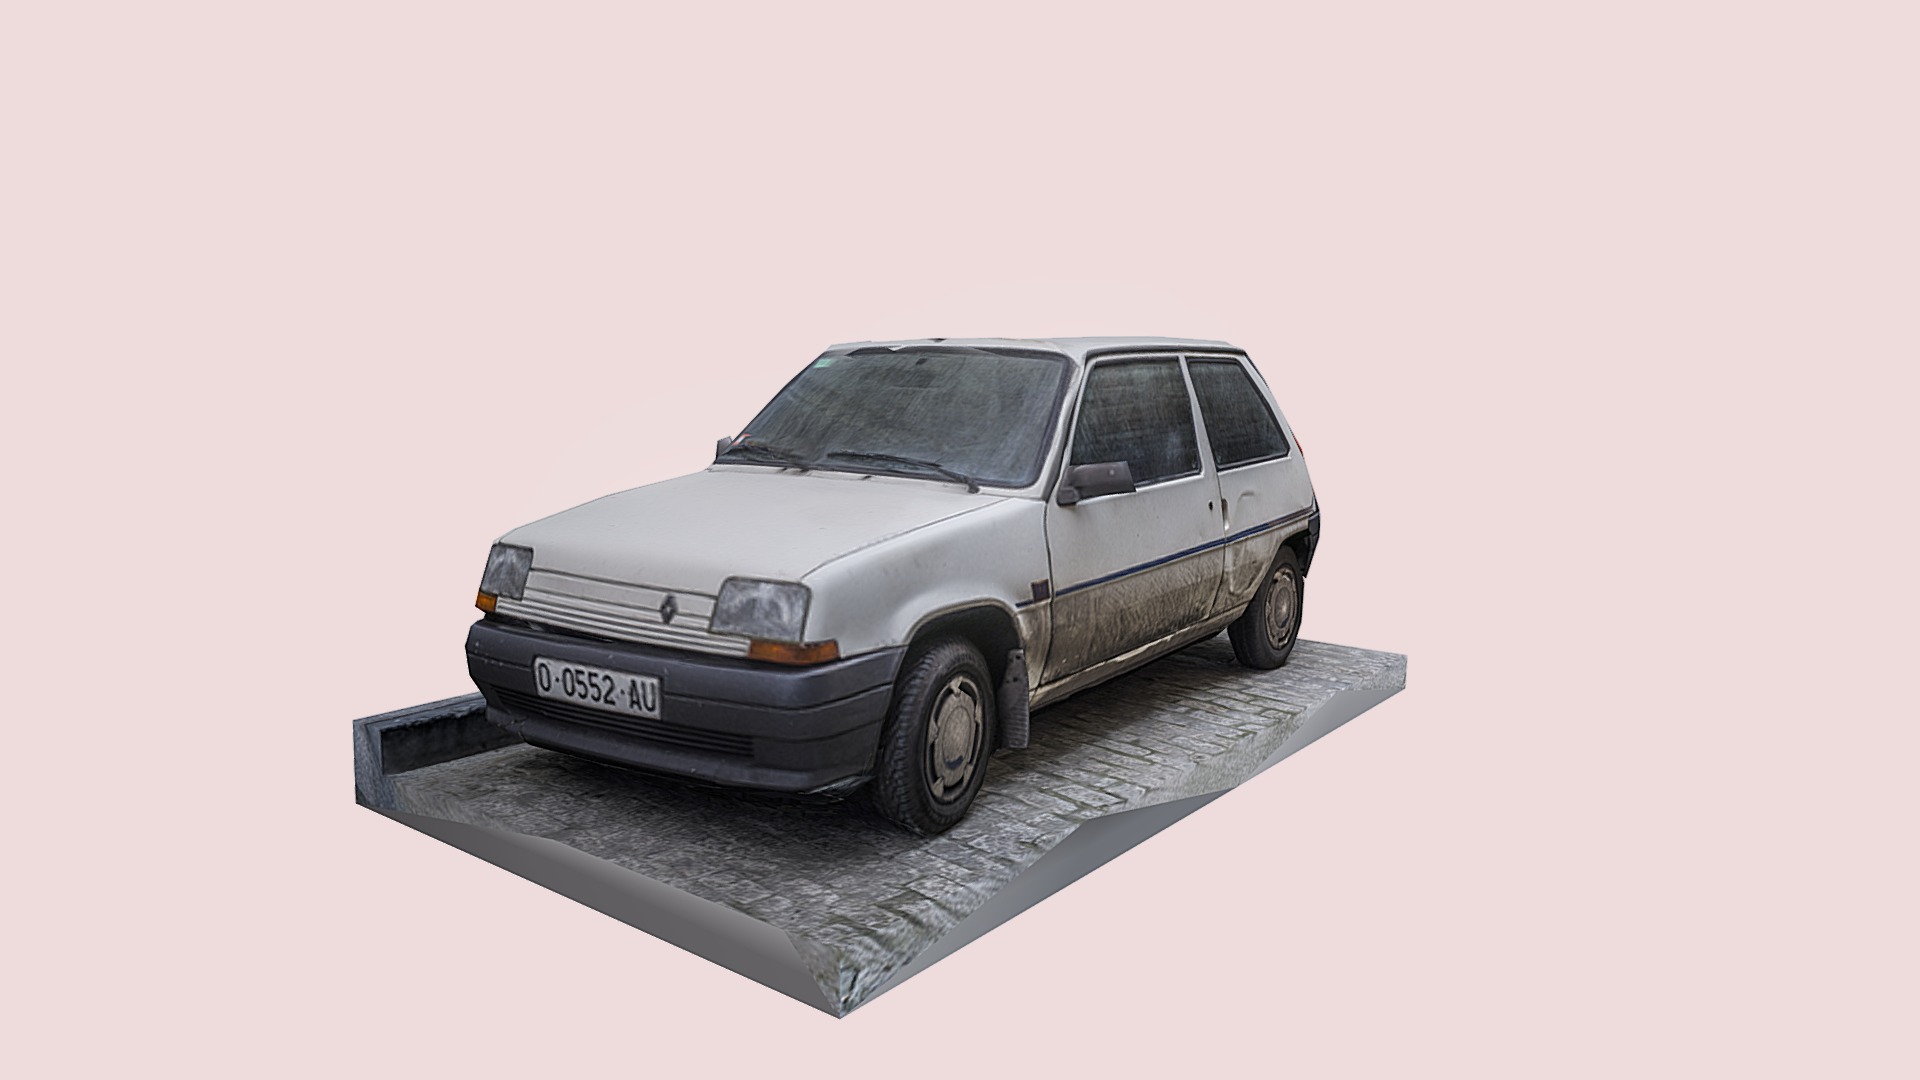 3D model Renault 5 photogrammetry scan and retopo test - This is a 3D model of the Renault 5 photogrammetry scan and retopo test. The 3D model is about a car parked on a platform.